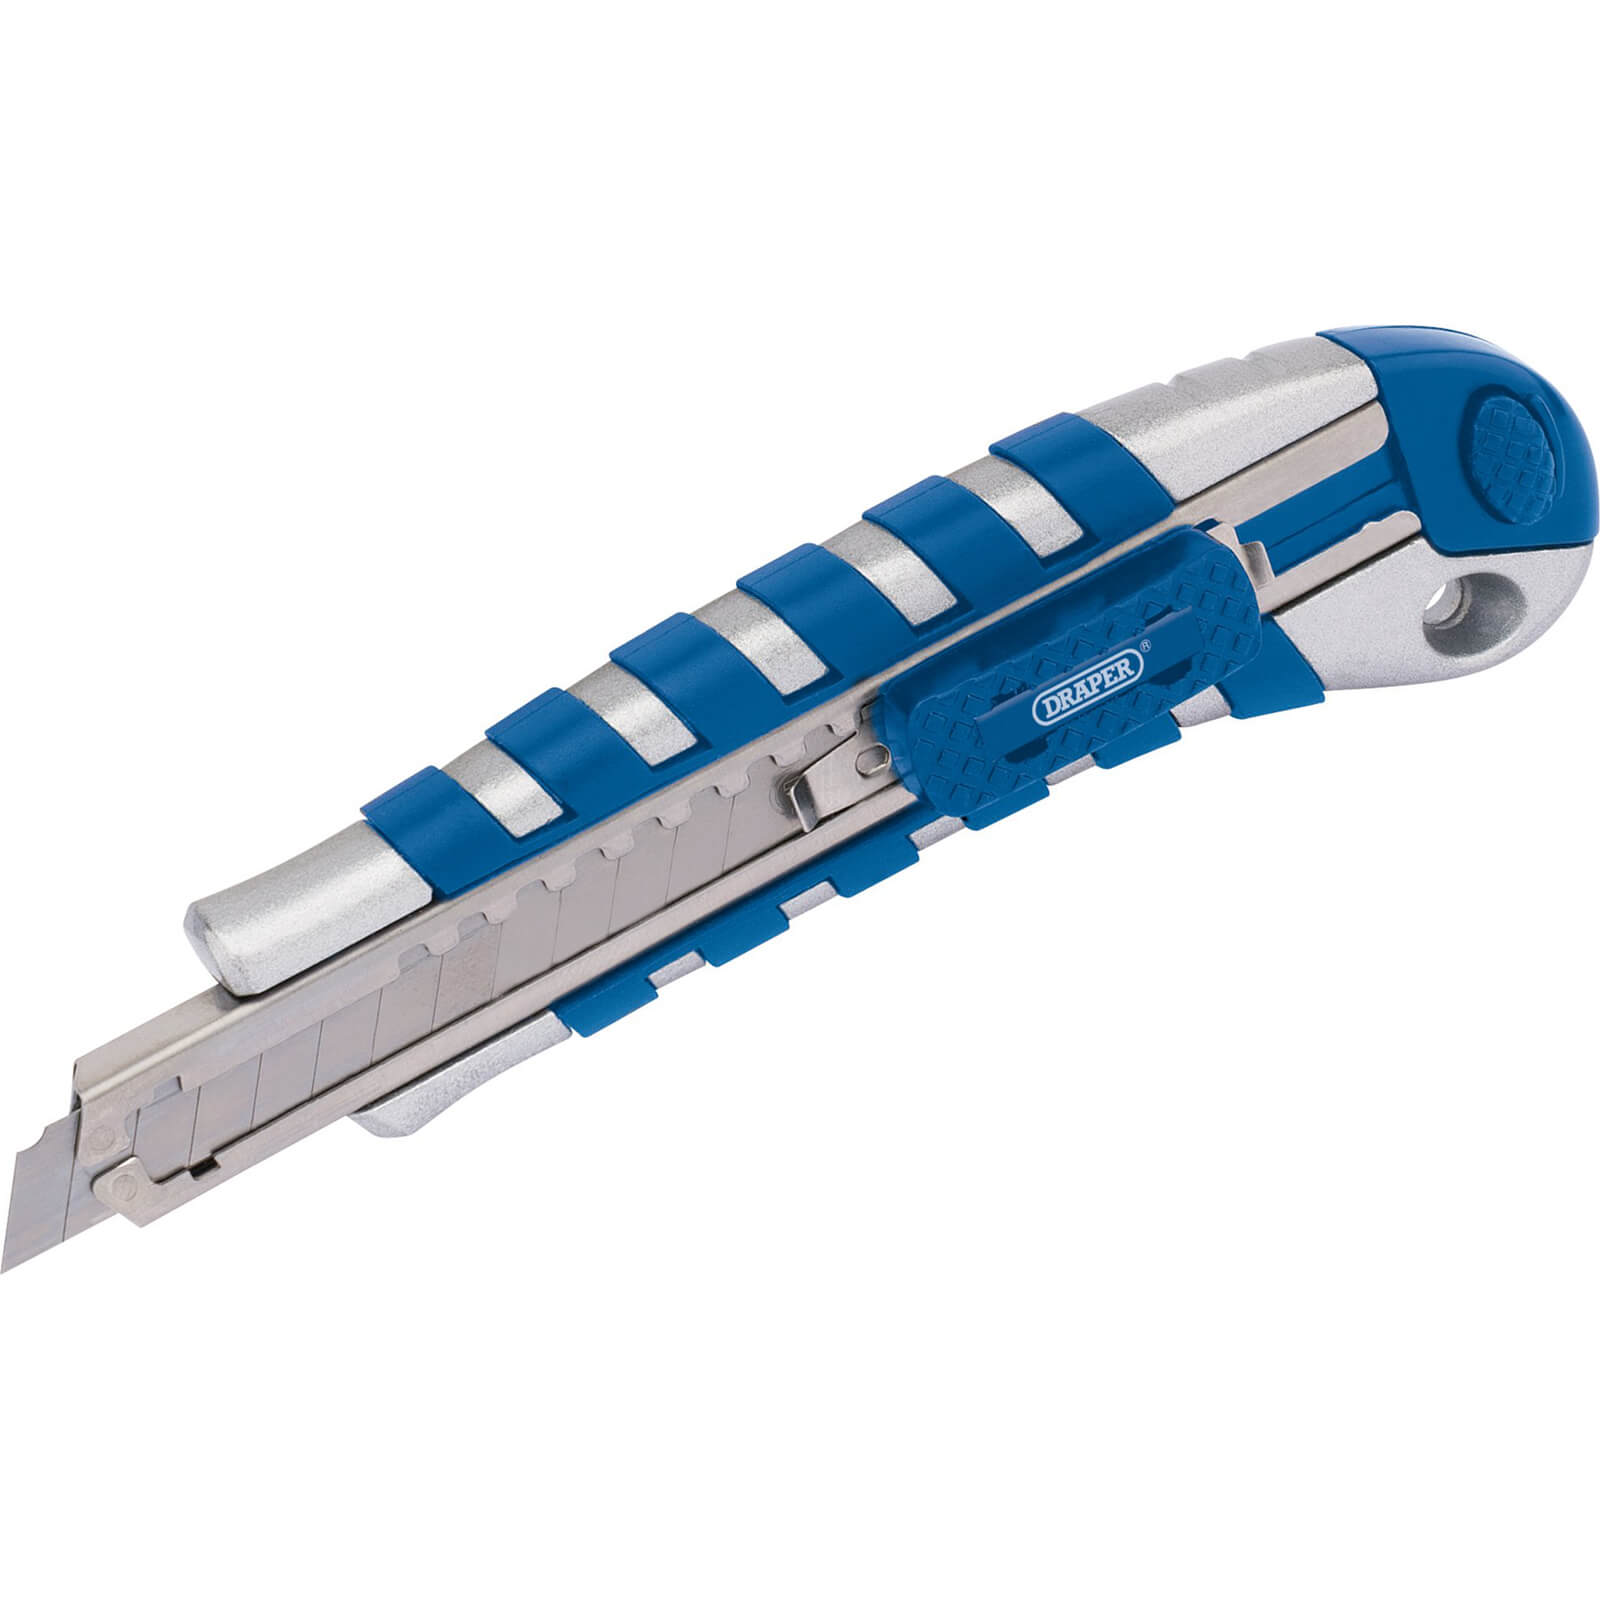 Image of Draper Soft Grip Retractable Snap Off Blade Utility Knife